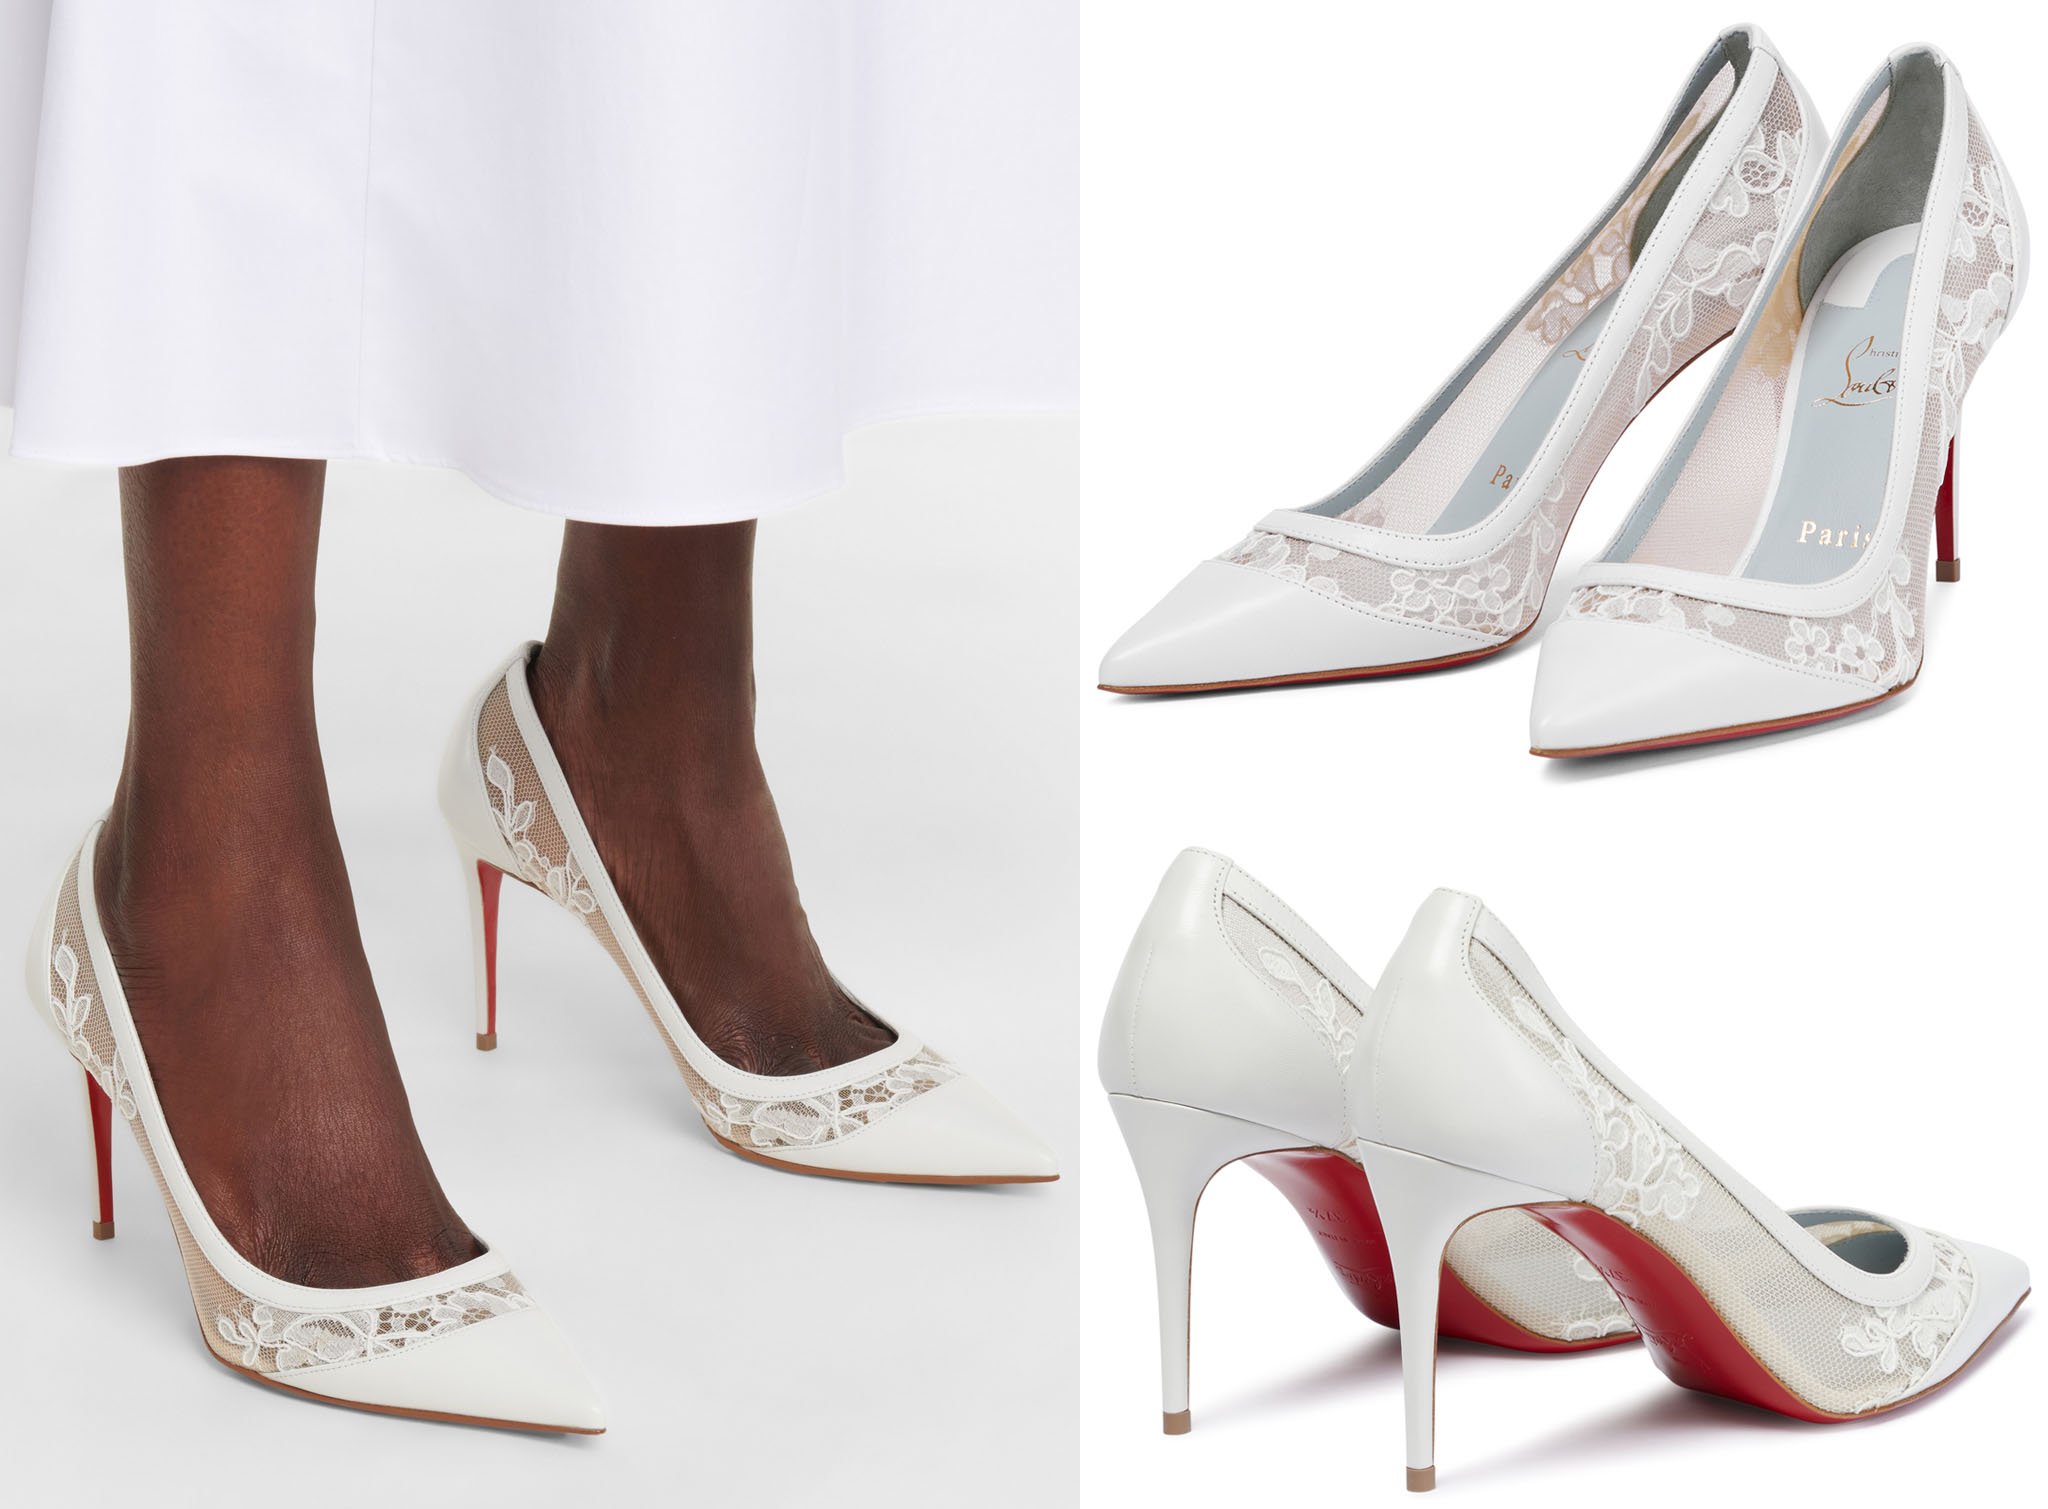 A chic option for the modern bride, these Galativi pumps from Christian Louboutin come in classic white with delicate floral lace paneling